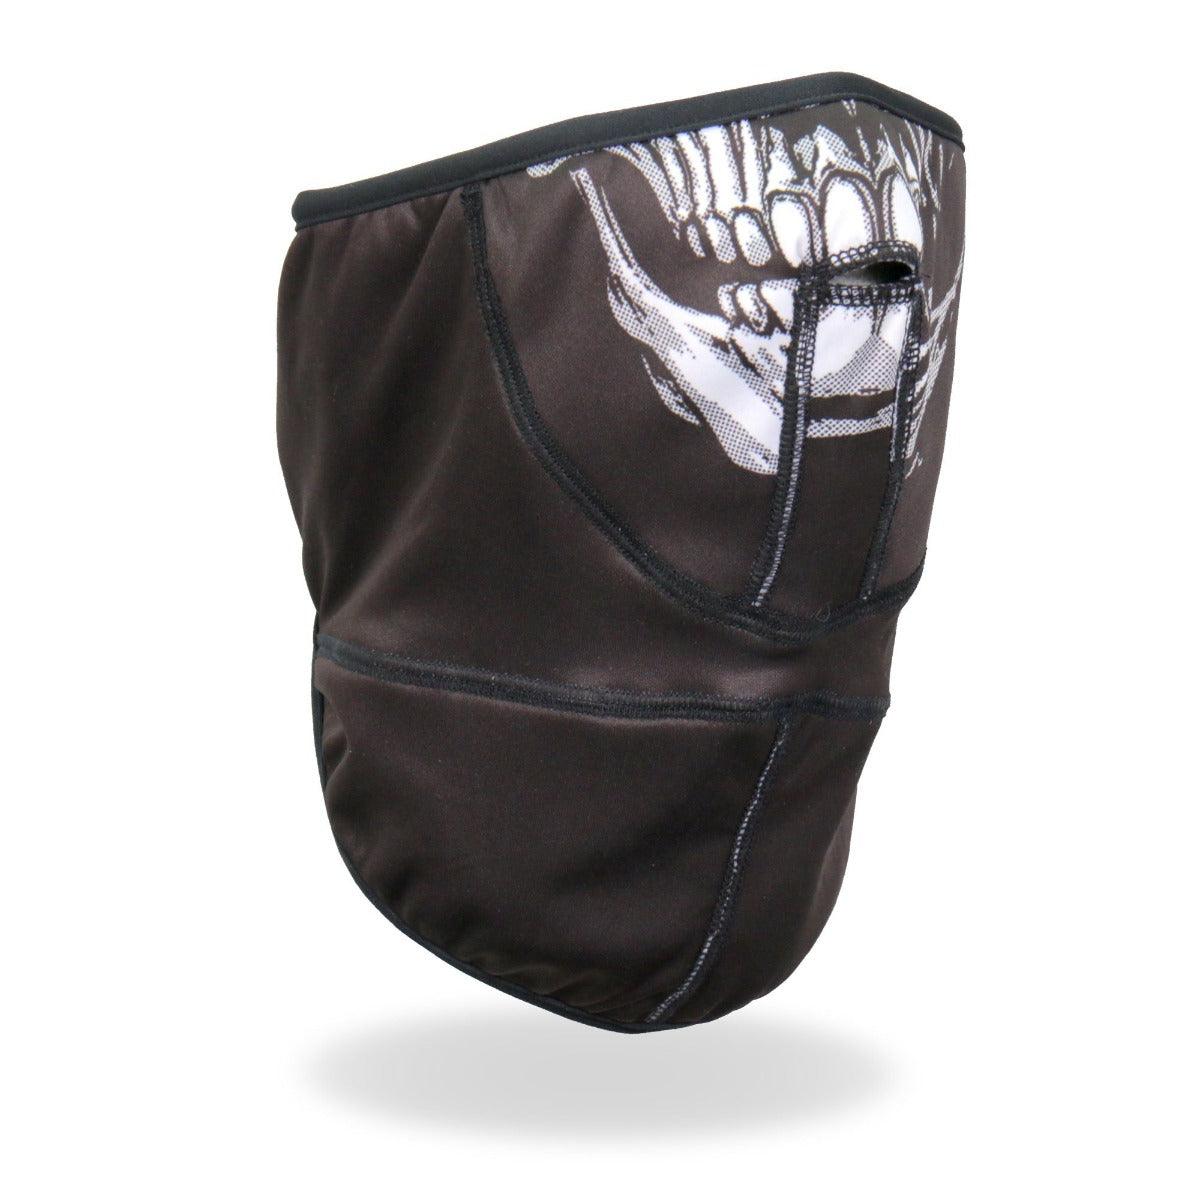 Hot Leathers Skull Face Wrap - American Legend Rider